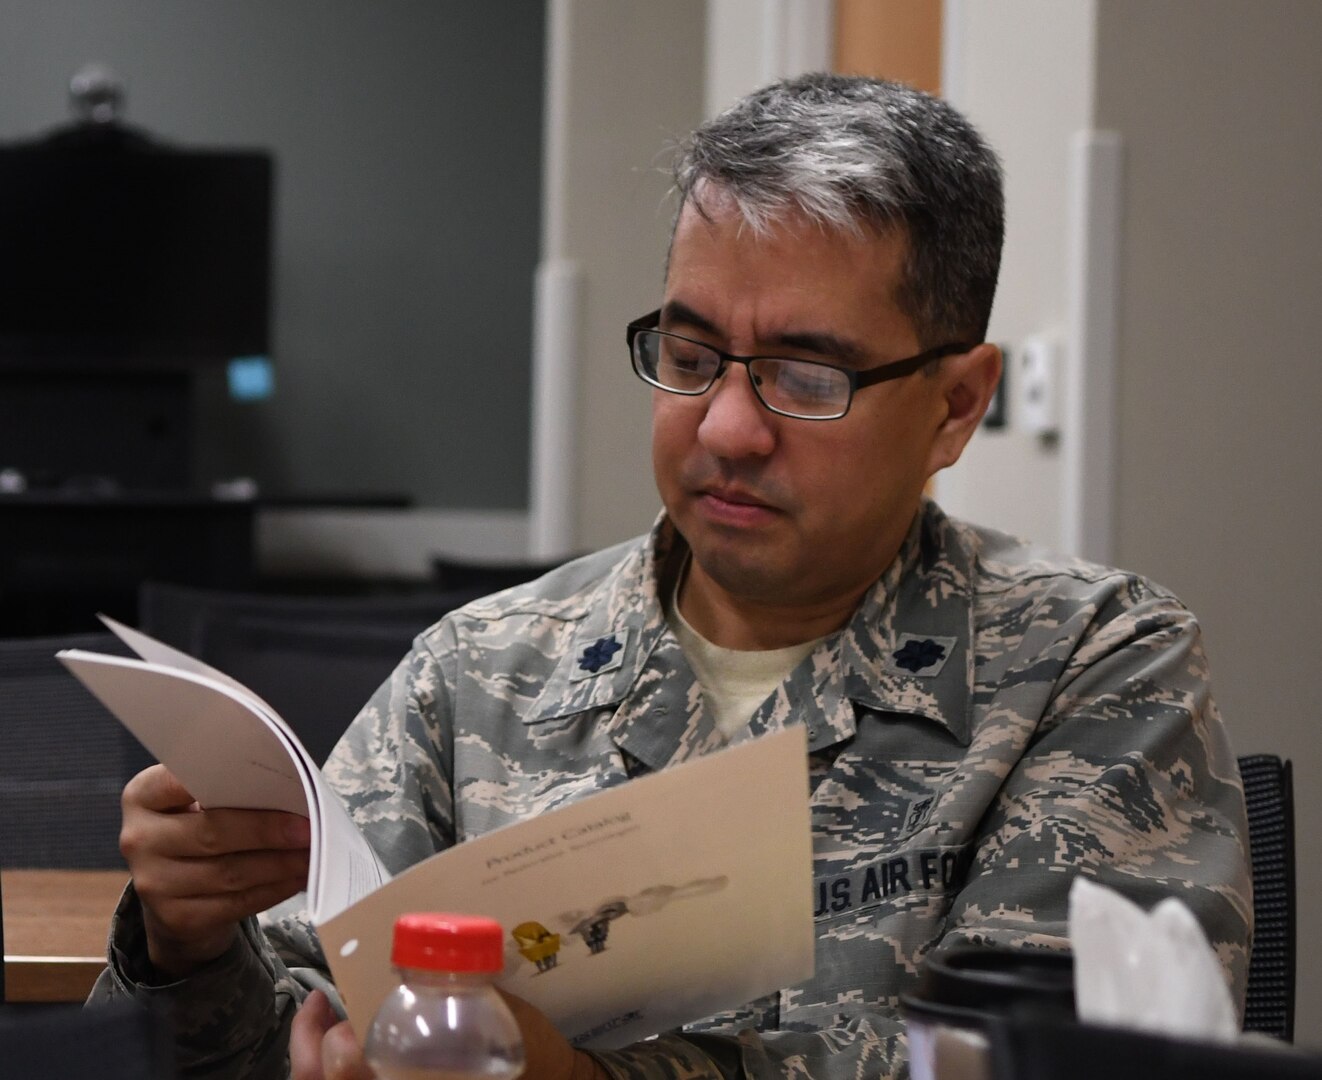 A student from the Air Force Post Graduate Dental School surgical skills and readiness course reviews the material during a lecture at the AFPDS, Joint Base San Antonio-Lackland Sept. 18. The training is a combination of three courses being run simultaneously to maximize use of resources and time.